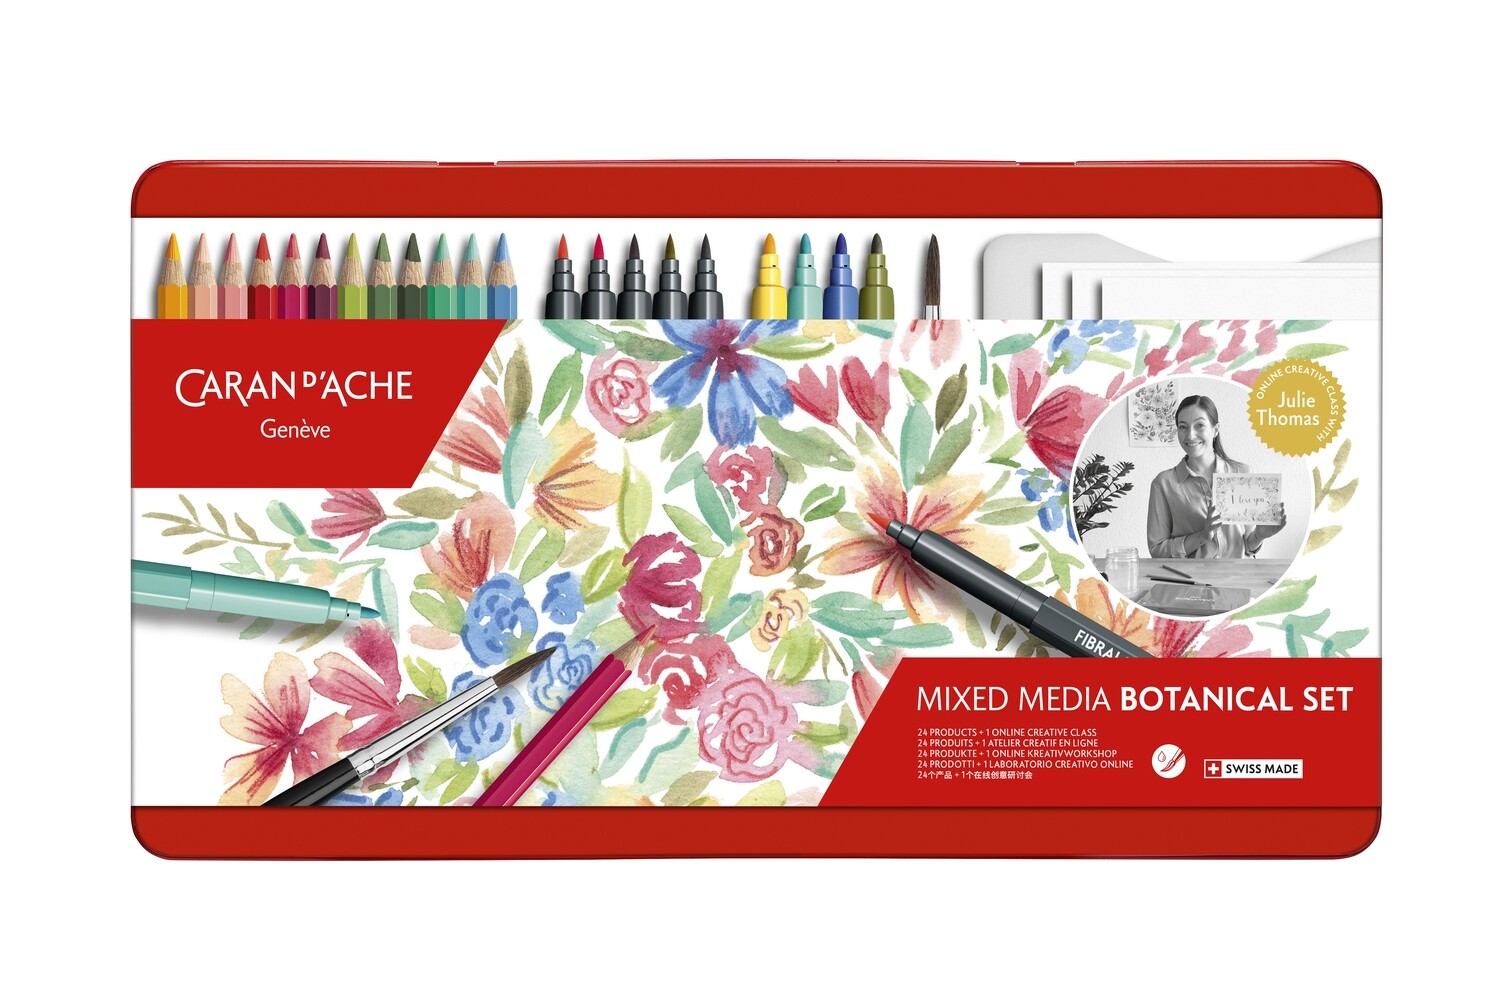 Caran D&#39;Ache Botanical colouring and lettering set by Julie Thomas + 1 online class